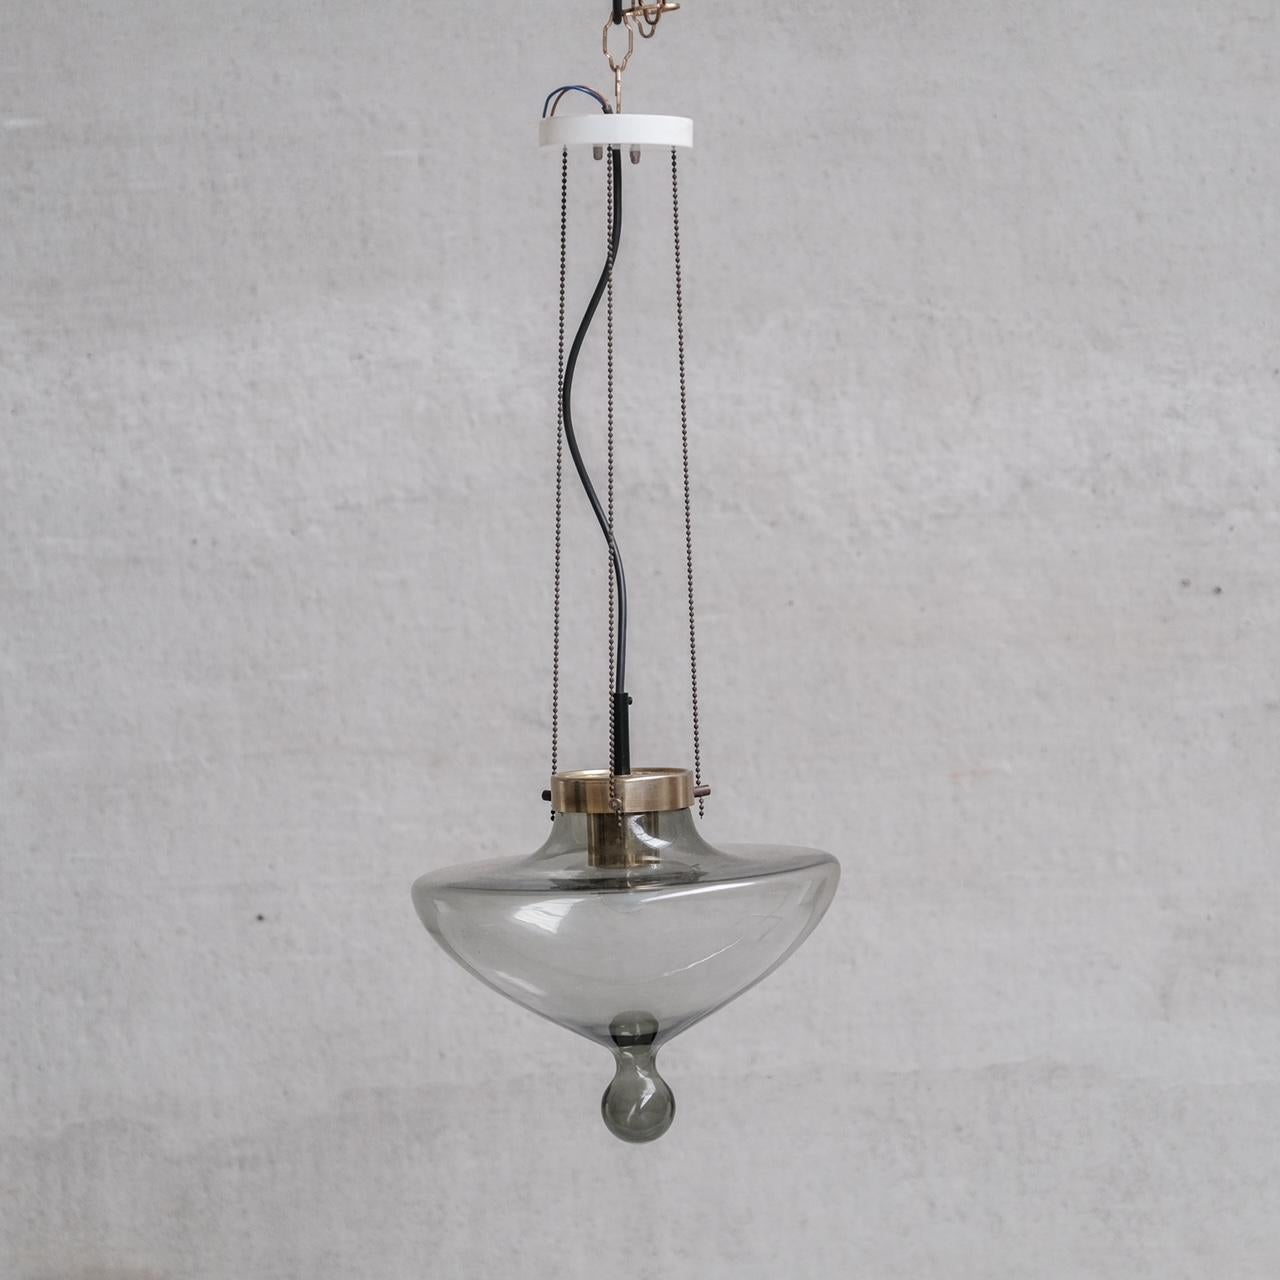 A smoked glass and brass pendant light by maker 'RAAK'. 

Holland, c1970s. 

Hand blown droplet style glass. 

TWO AVAILABLE AT THE TIME OF LISTING. PRICE IS PER PEICE. 

Since re-wired and PAT tested. 

Internal ref: 27/12/23/029.

Good vintage